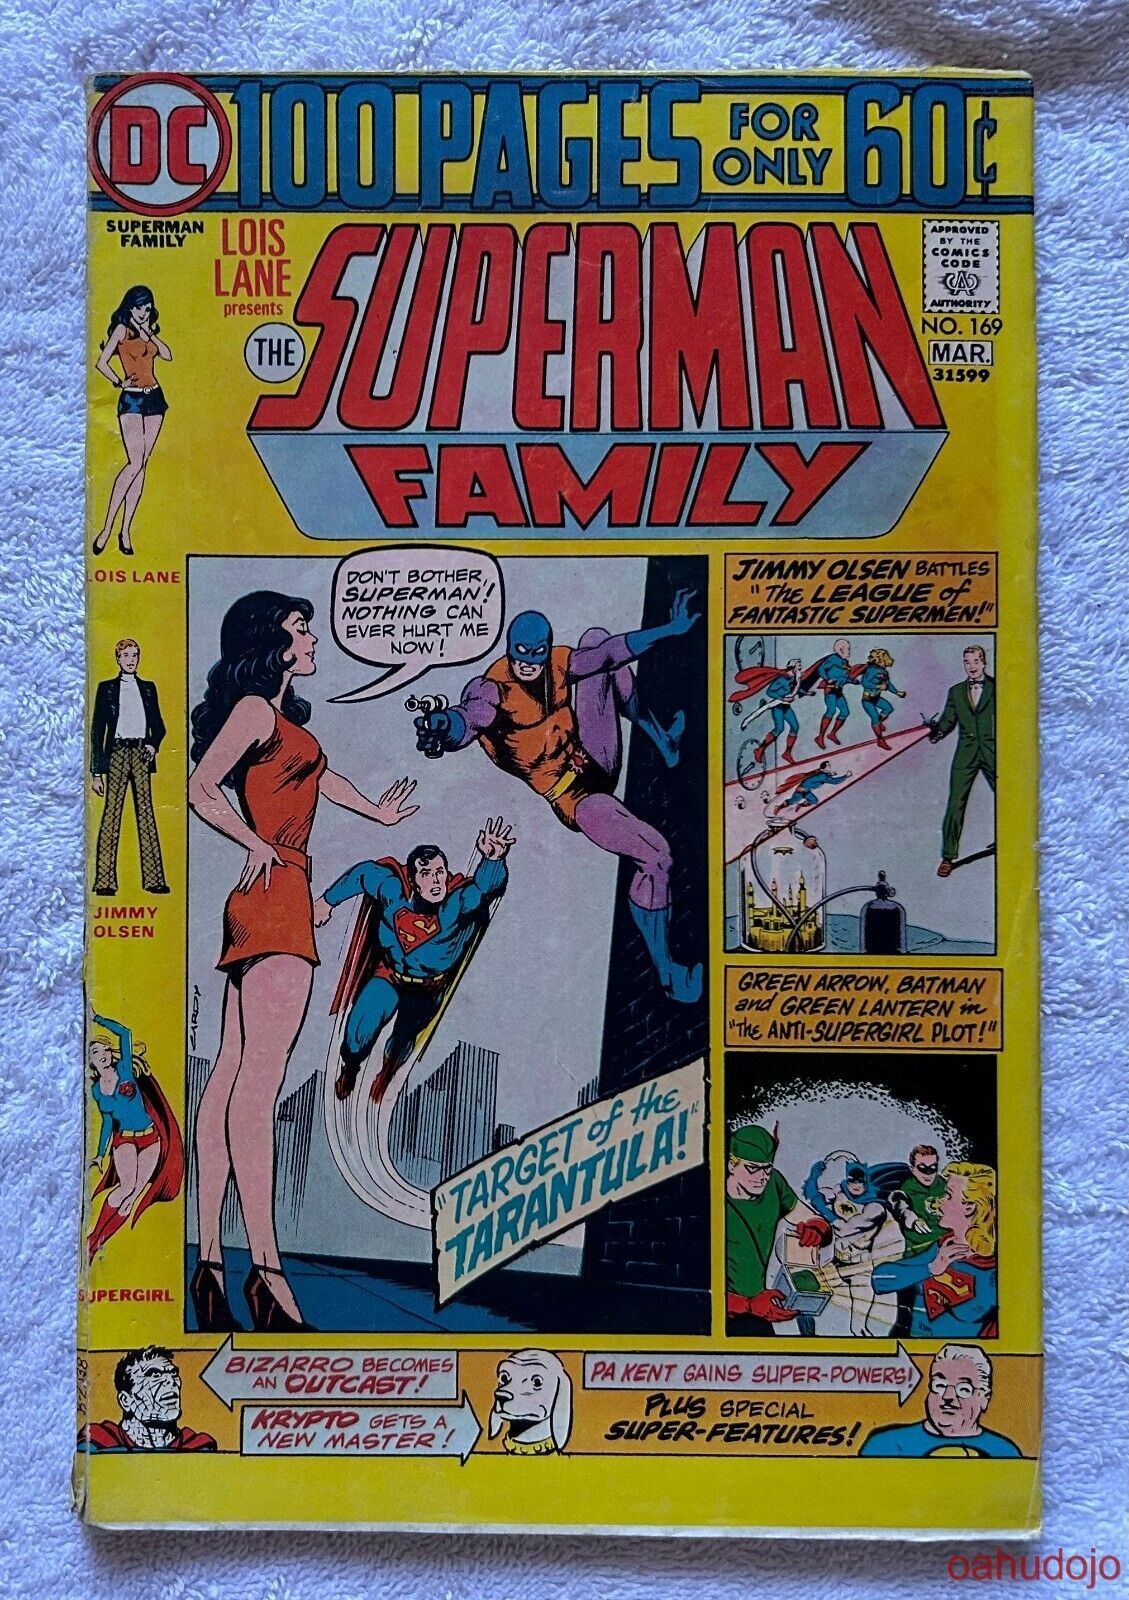 DC SUPERMAN FAMILY #169 1st Series Giant Size Issue March 1975 FN*